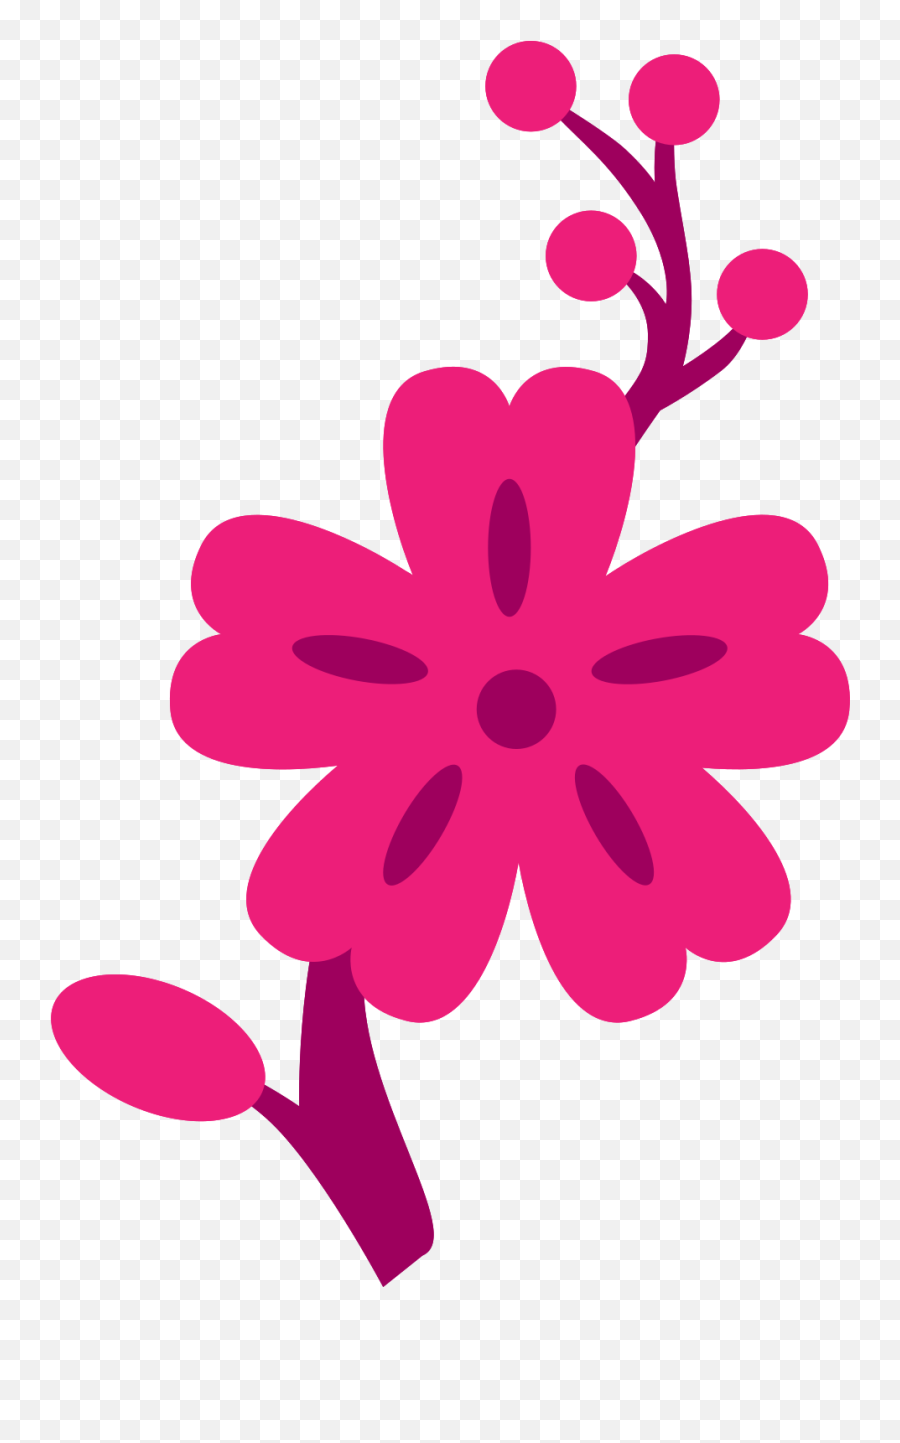 Free Cute Flower 1190536 Png With Transparent Background - Pink Cute Flowers Transparent Background Emoji,Flower Png Transparent